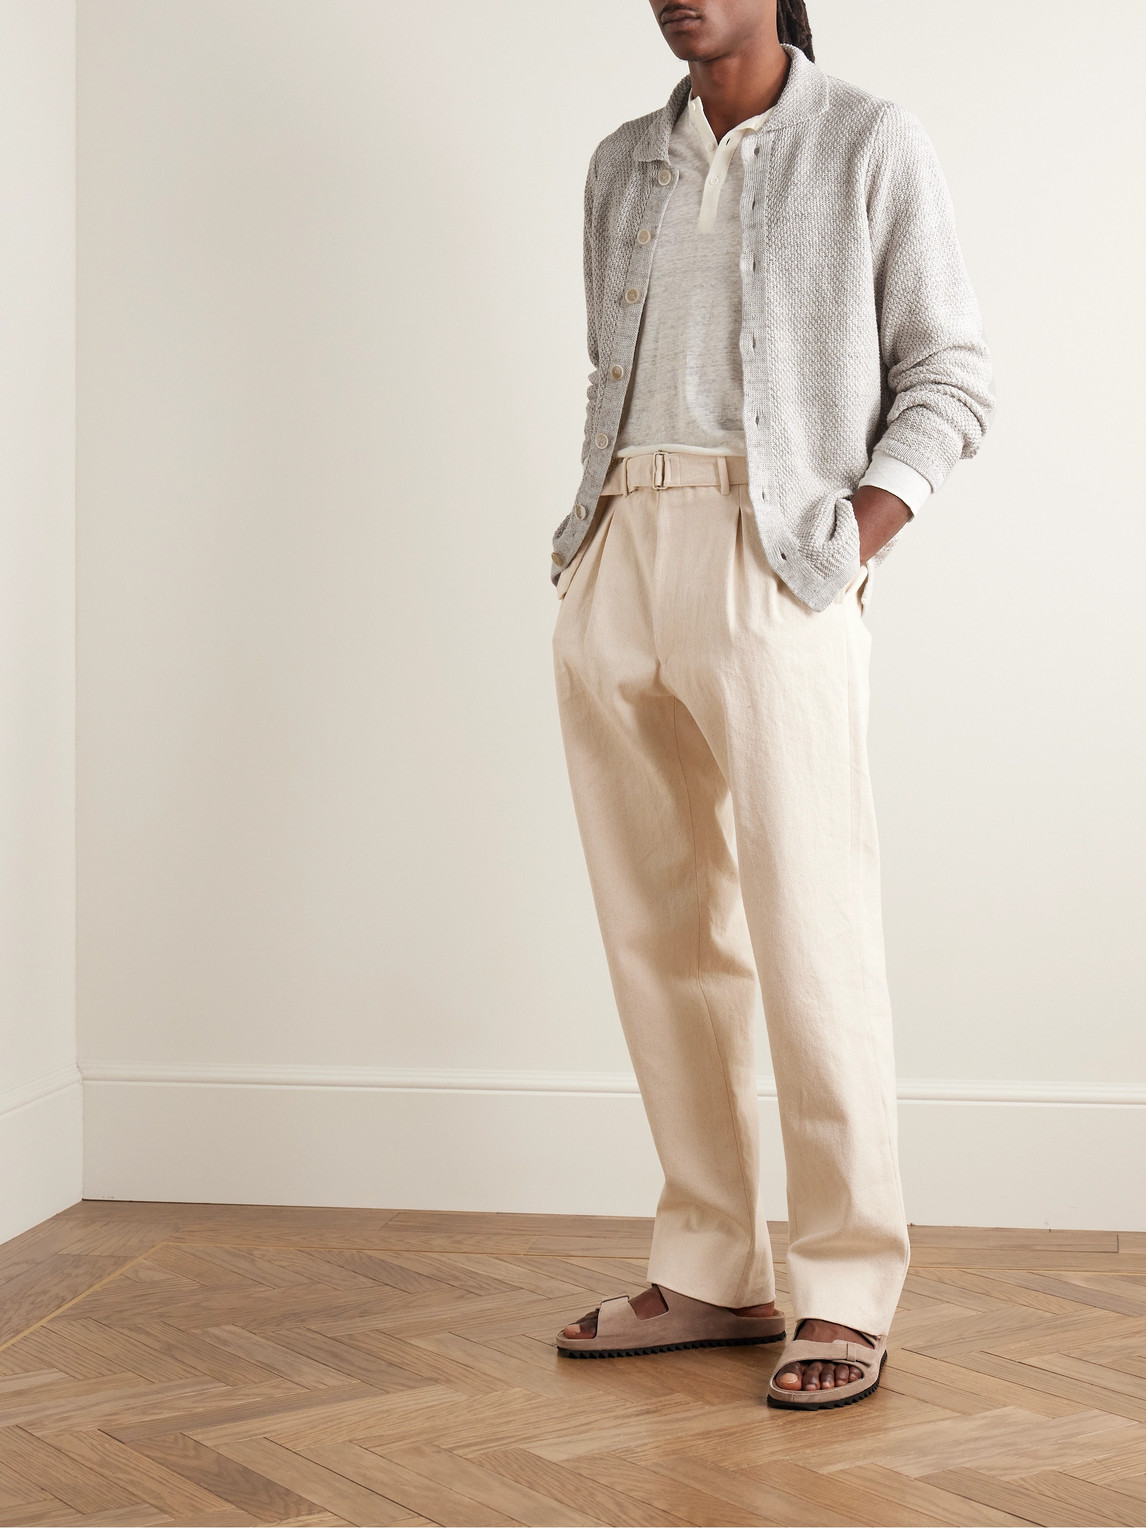 Shop Inis Meain Linen Cardigan In Gray